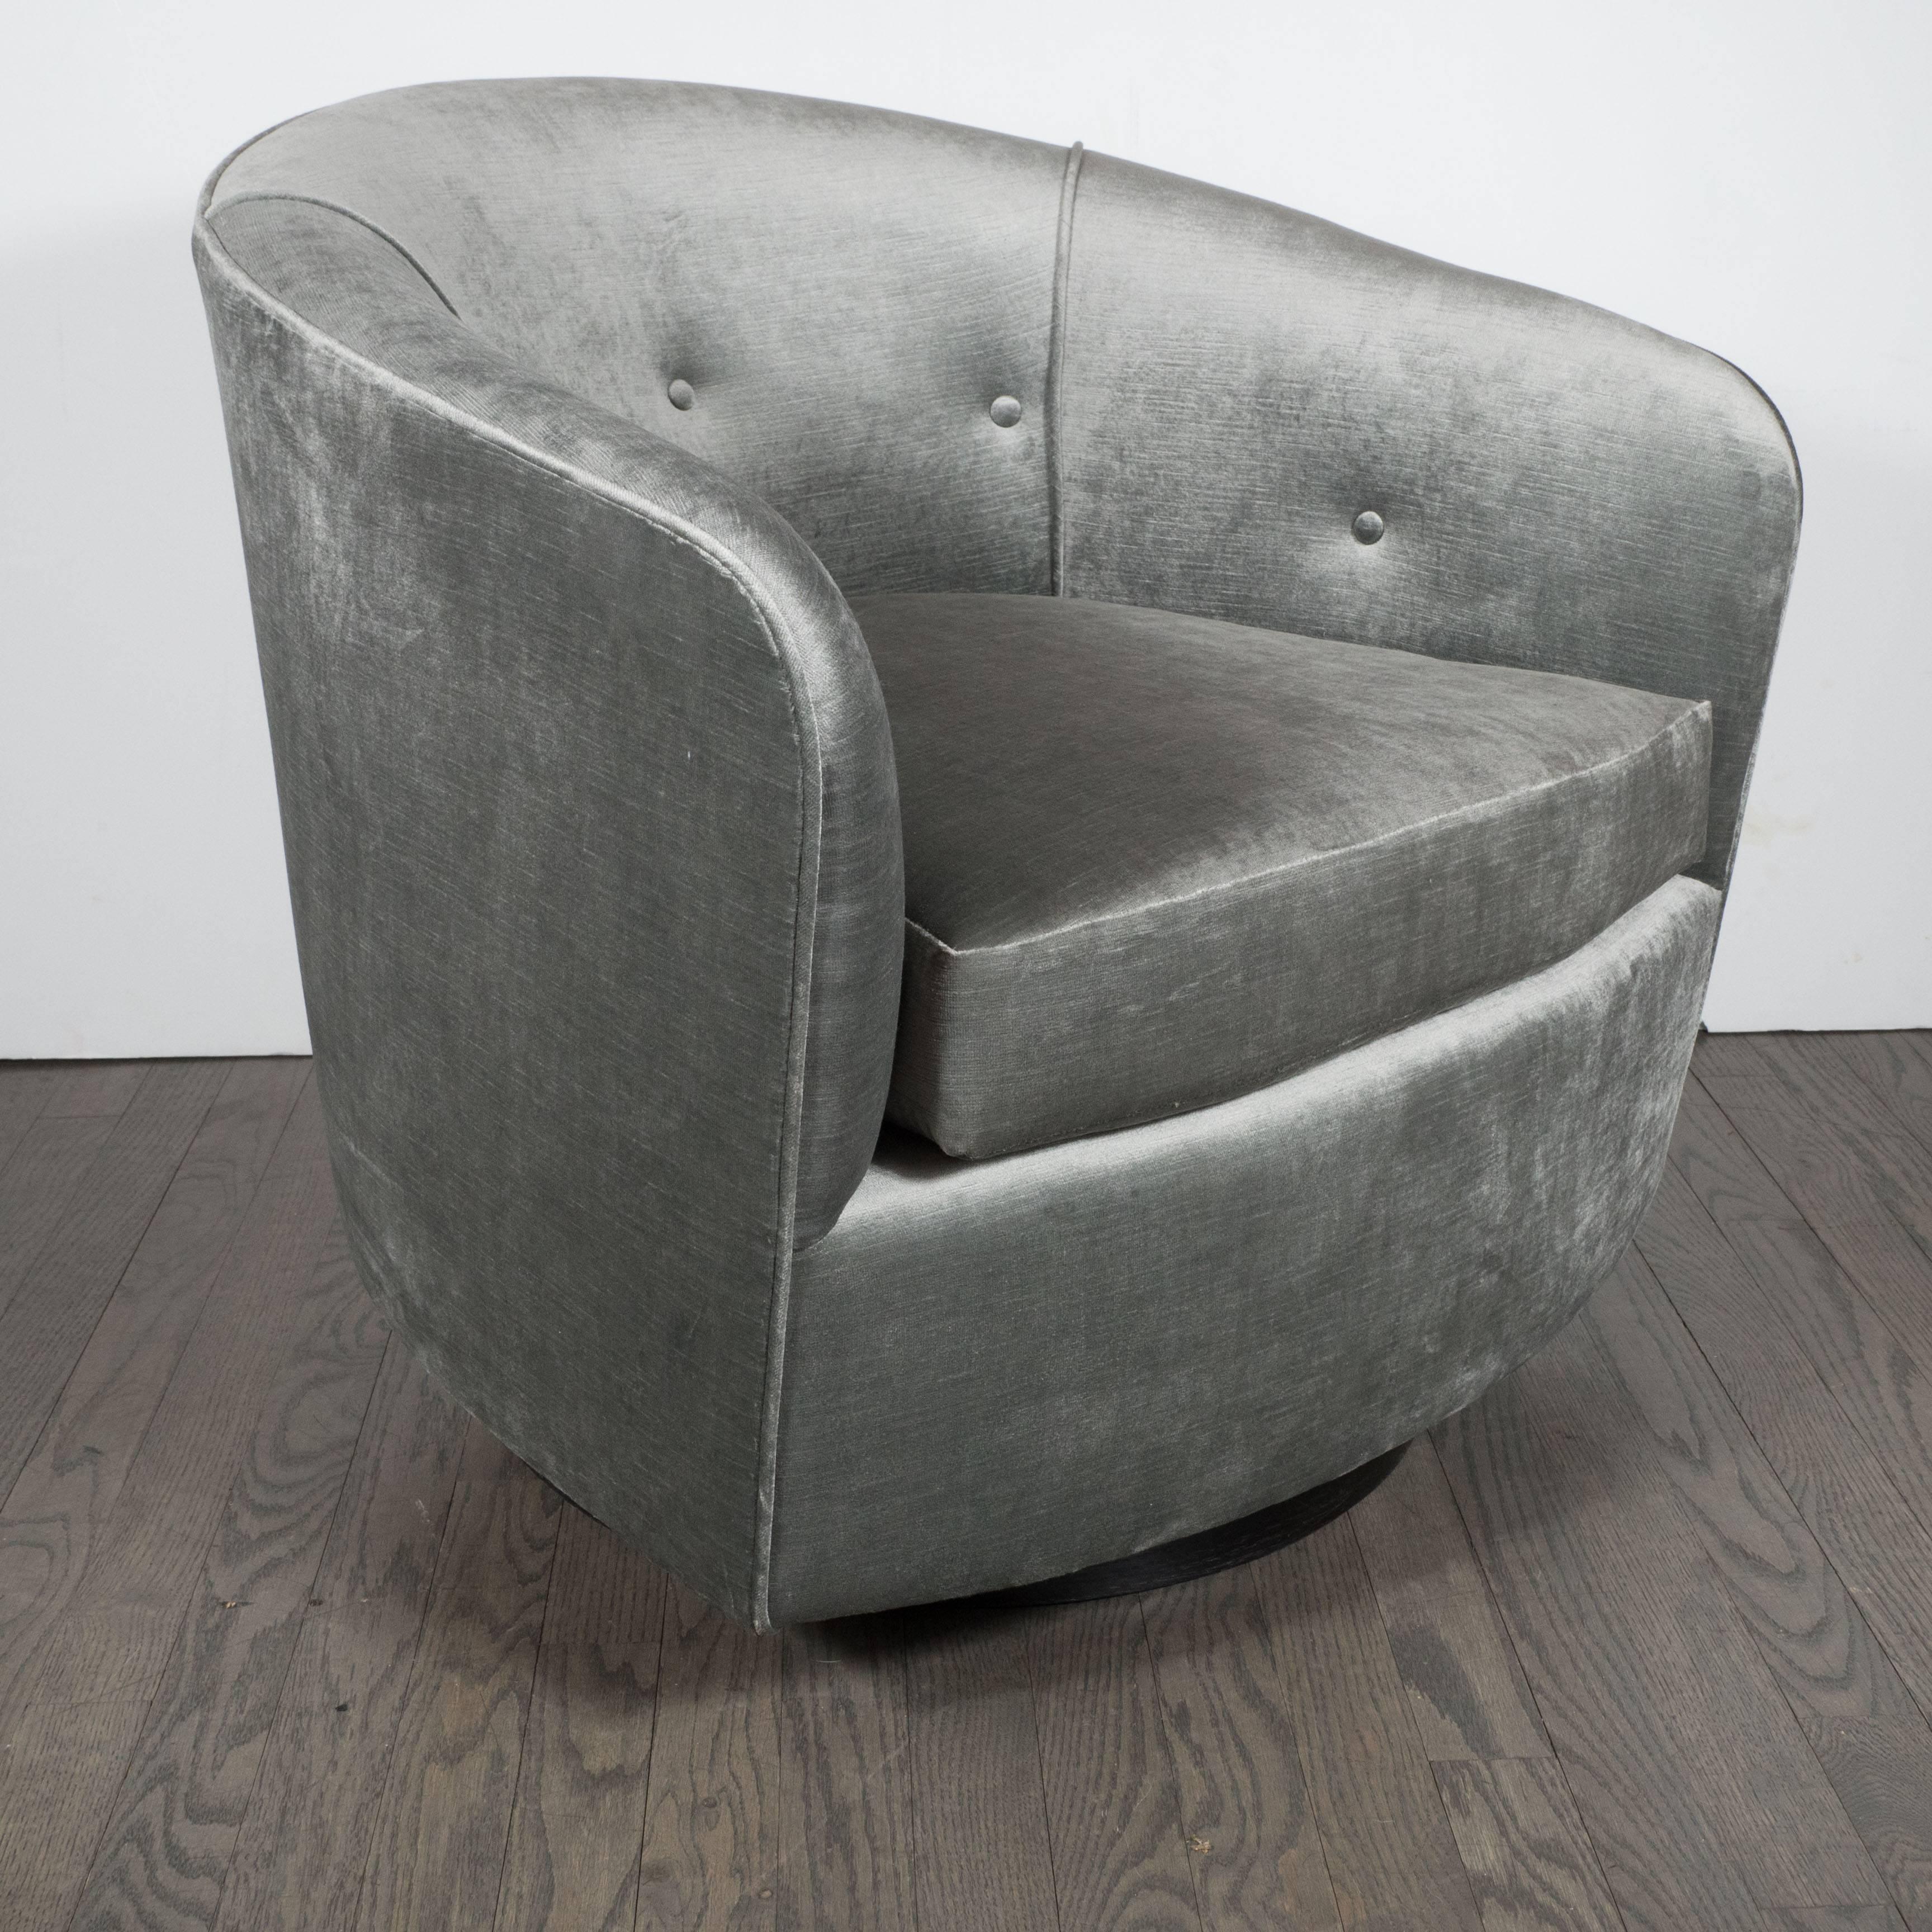 American Pair of Milo Baughman Swivel Chairs in Platinum Velvet with Tufted Detailing